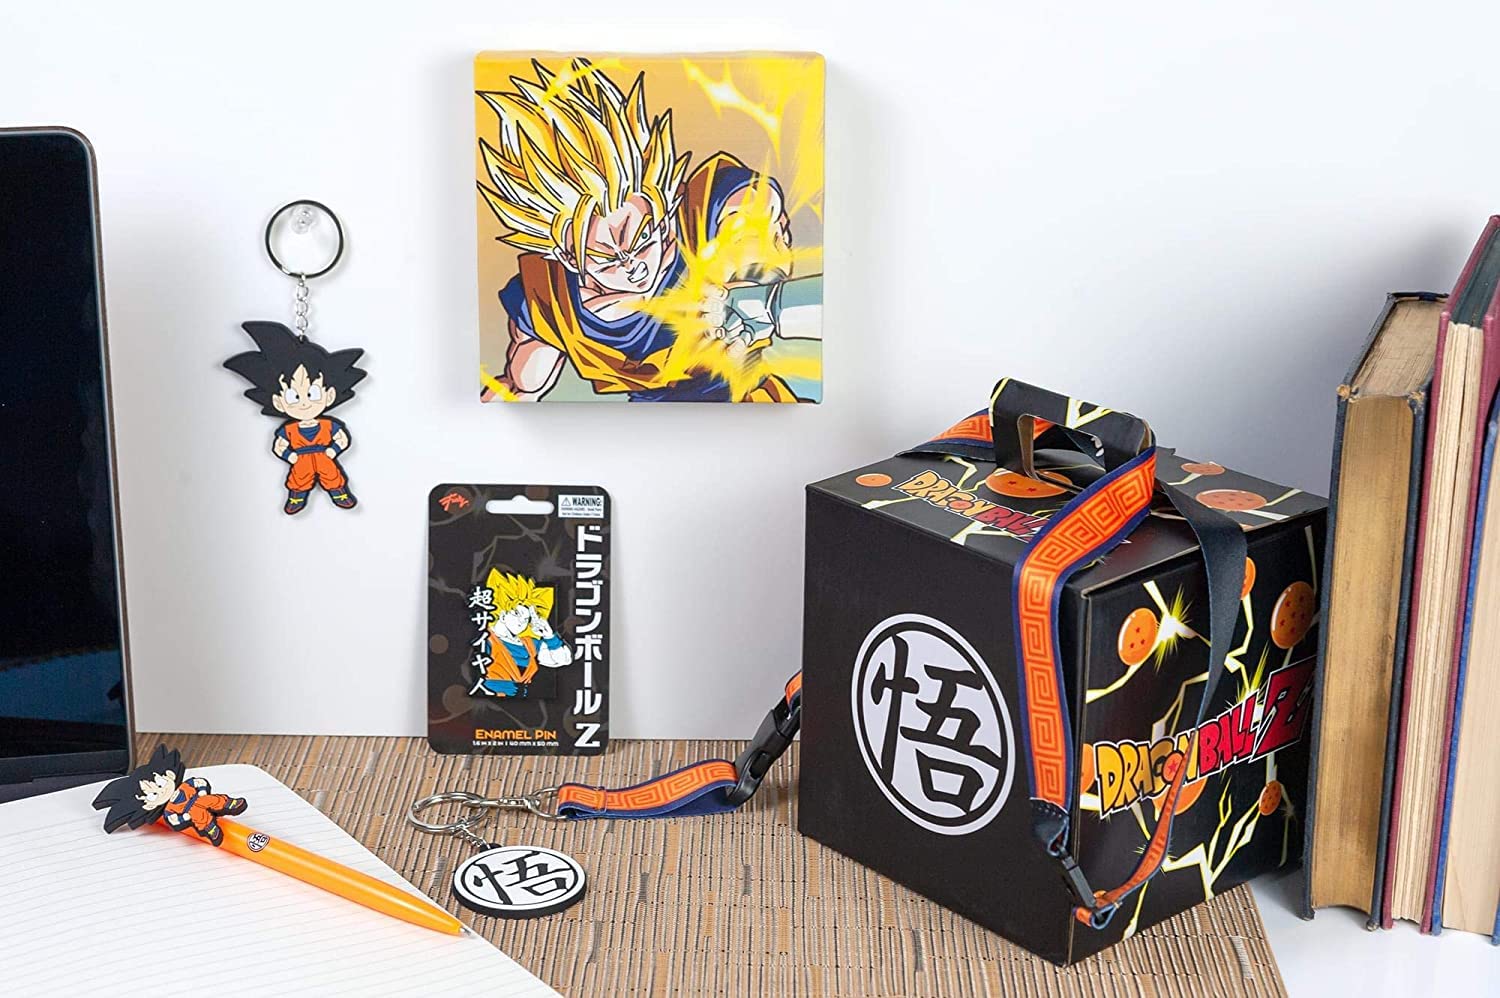 JUST FUNKY Dragon Ball Z Goku Collector Looksee Box Items | Geeky Gift Box | 5 Themed Toy Collectibles